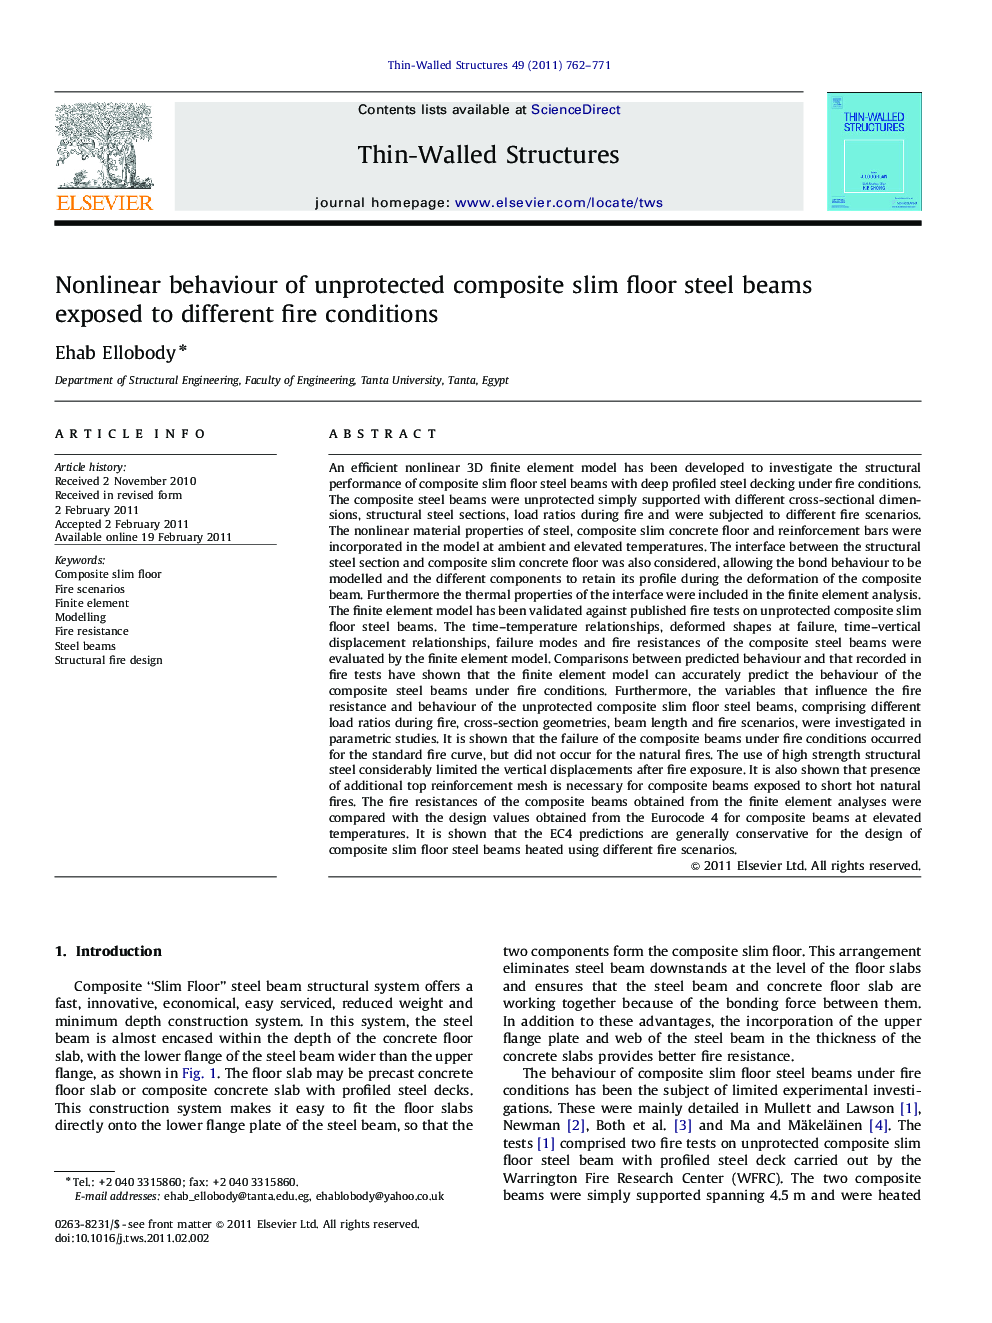 Nonlinear behaviour of unprotected composite slim floor steel beams exposed to different fire conditions